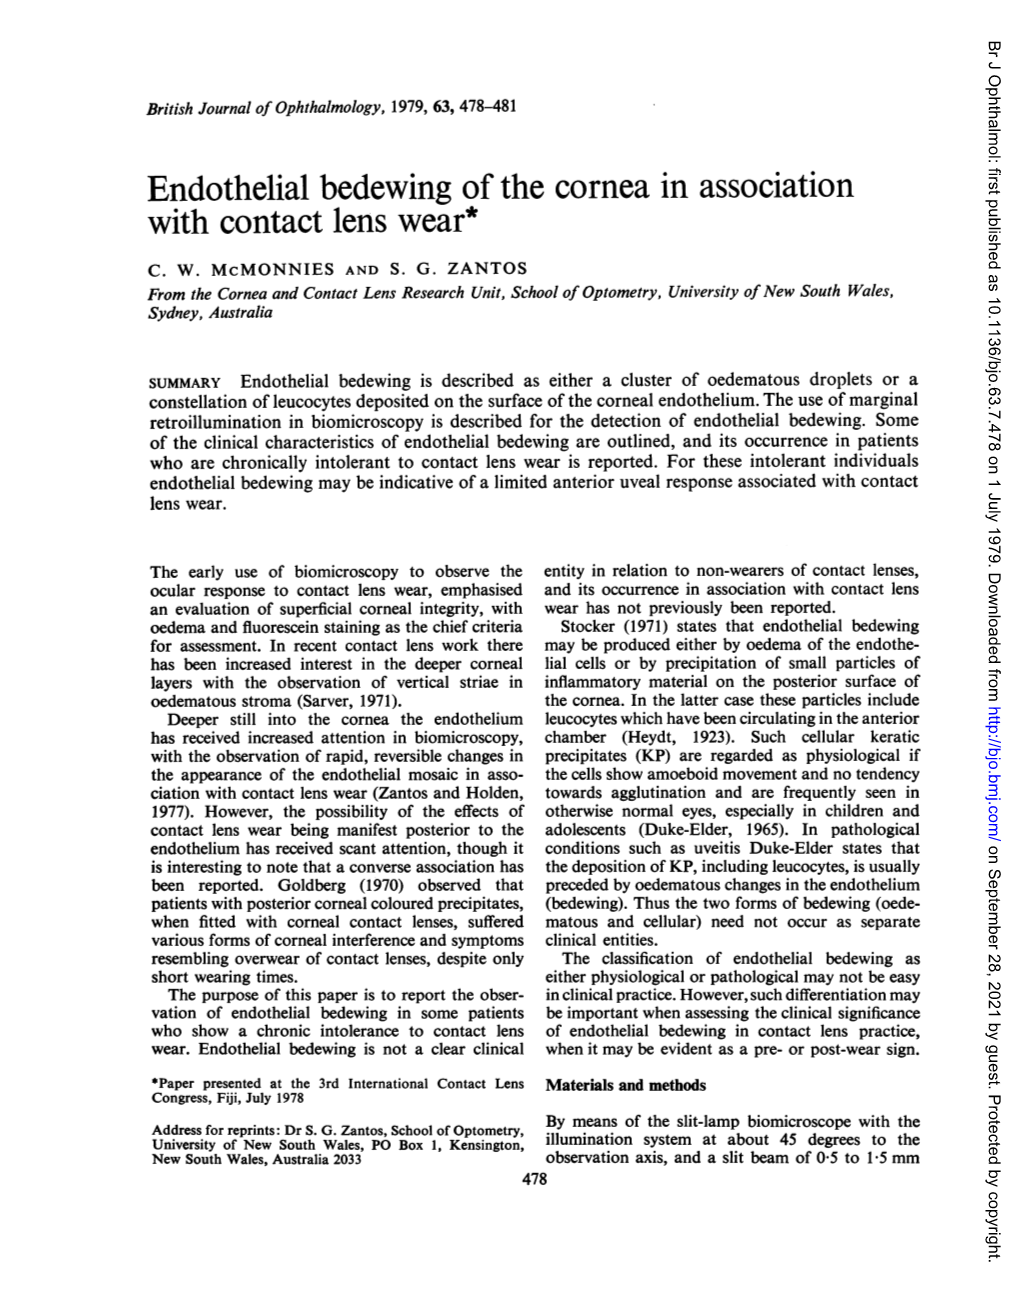 Endothelial Bedewing of the Cornea in Association with Contact Lens Wear*